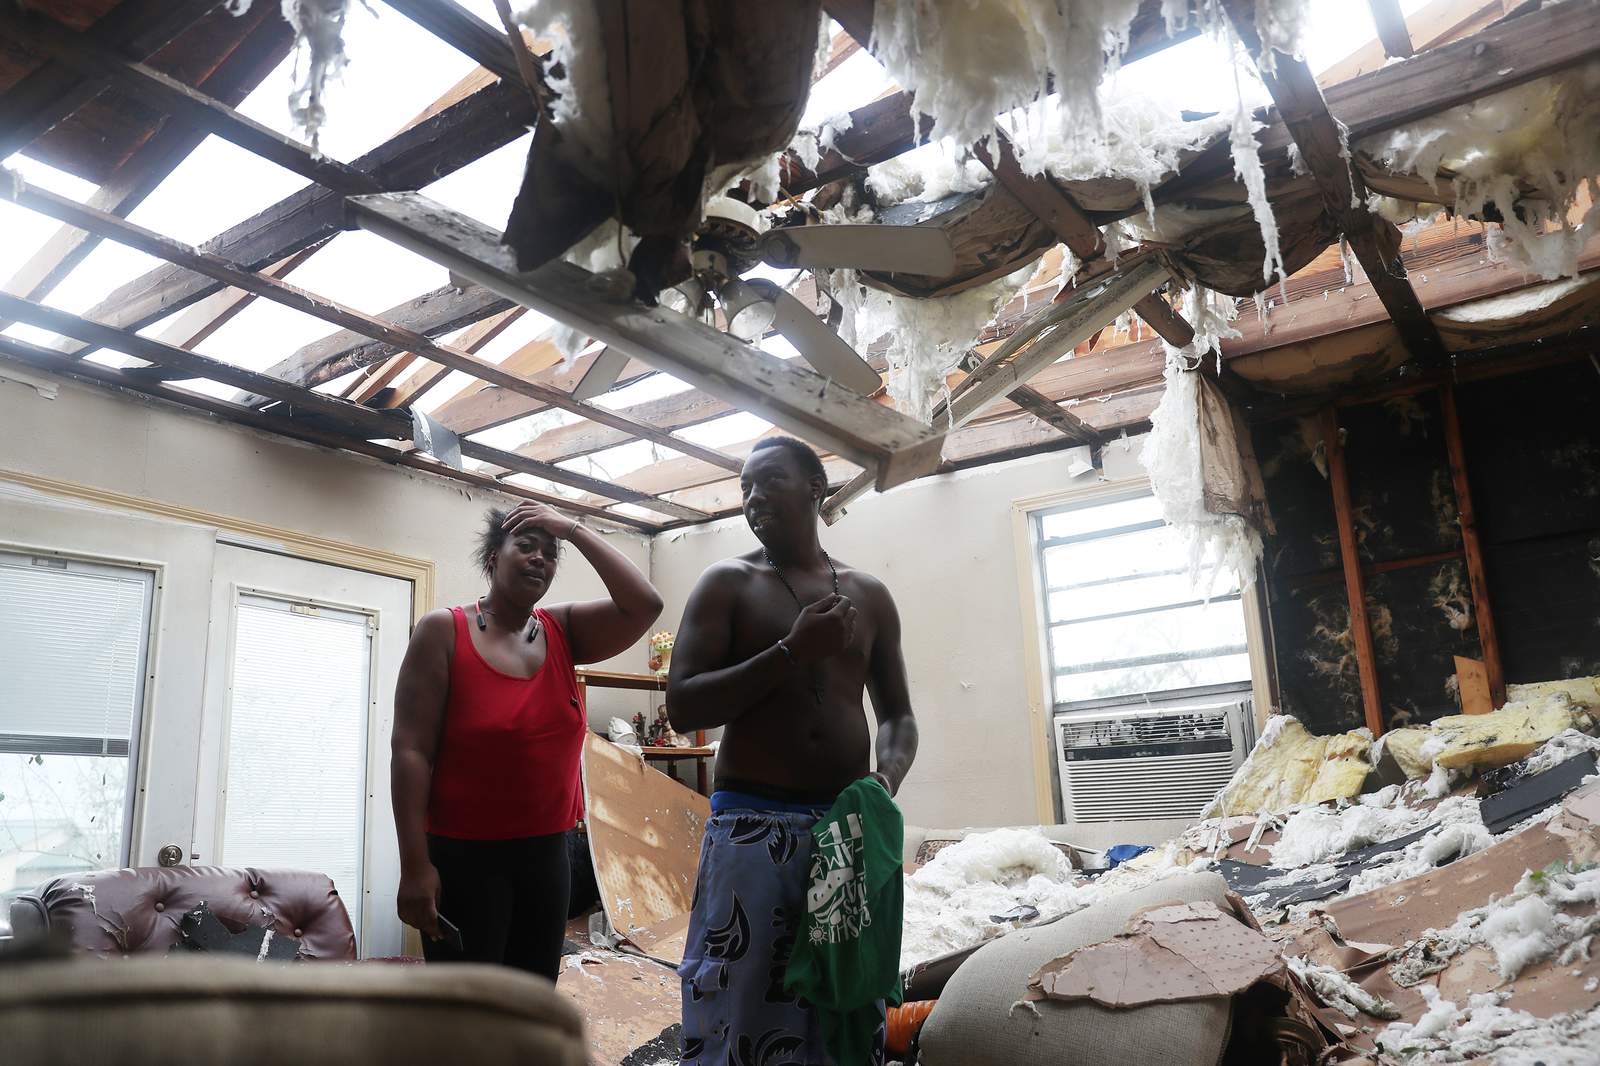 Daylight brings images of destruction throughout Louisiana